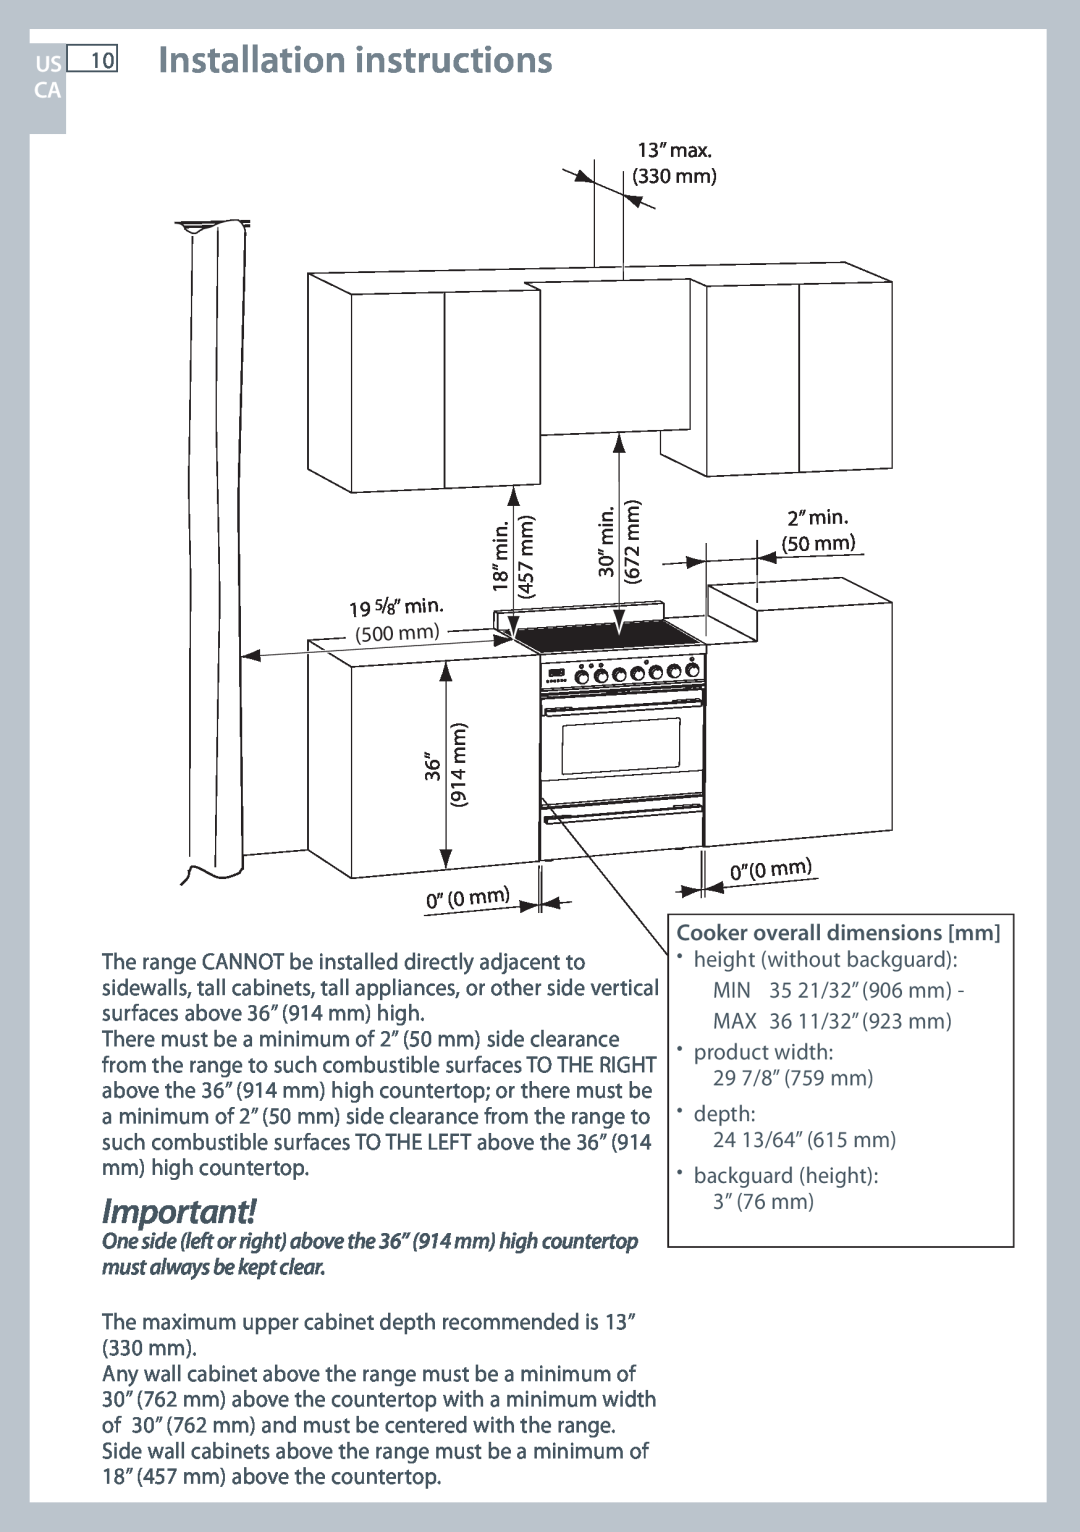 Fisher & Paykel OR305SDPWSX Installation instructions, Cooker overall dimensions mm, 13” max. 330 mm, 8”min, 500 mm 